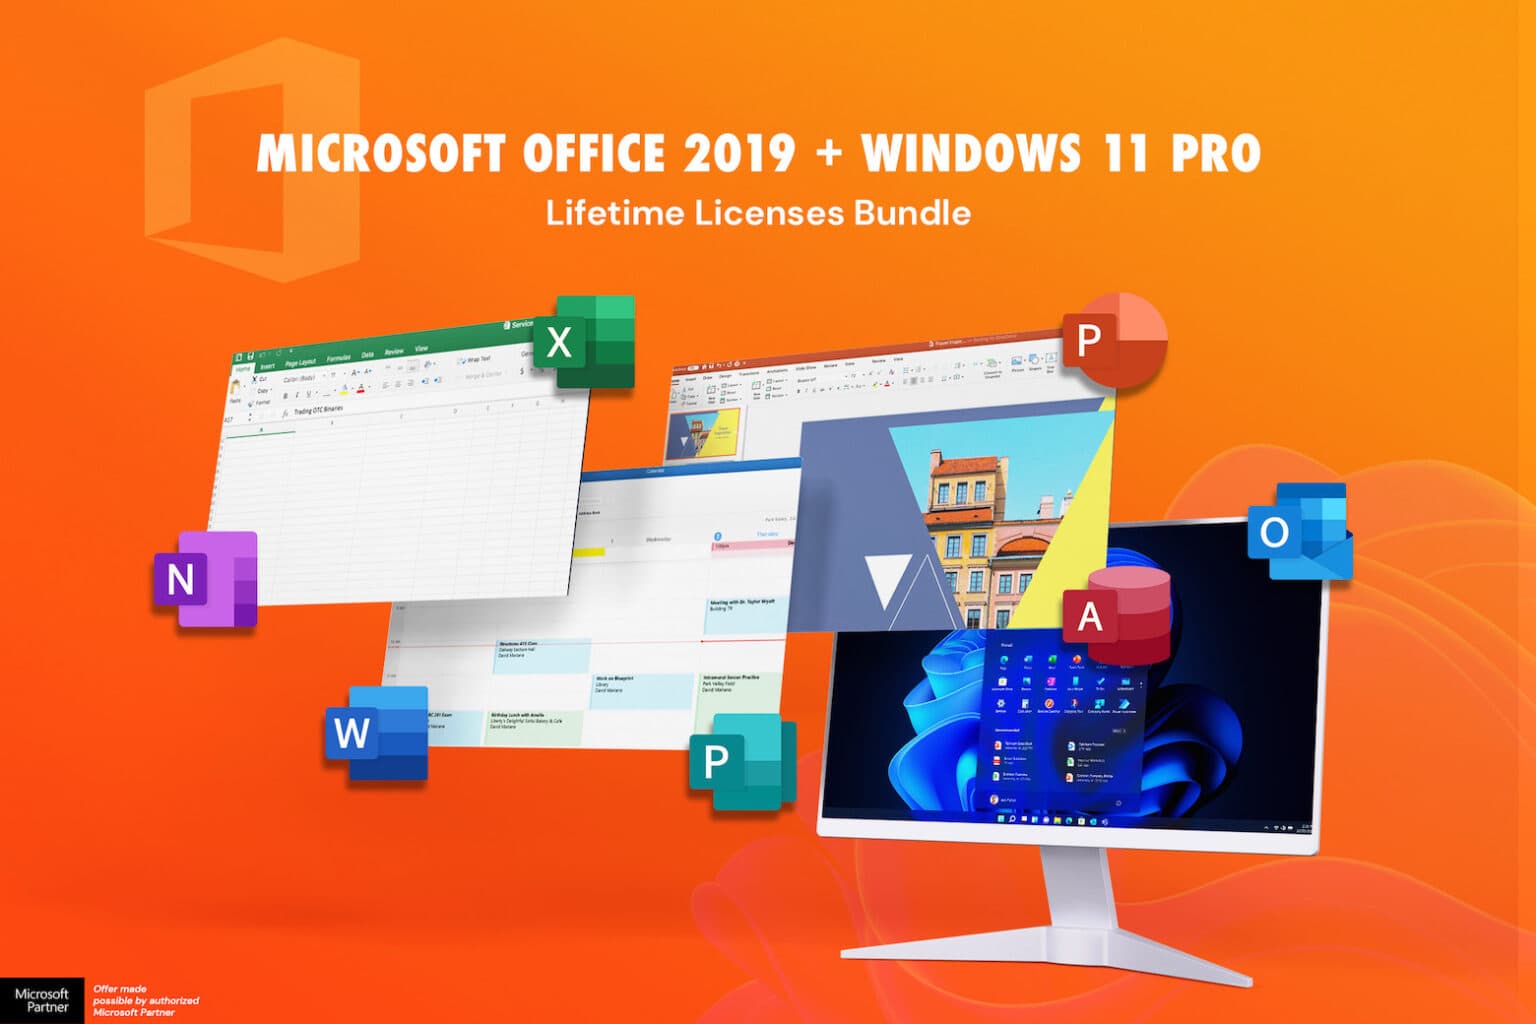 Last-minute gift alert: Give a PC lover Microsoft Office 2019 and Windows 11 Pro for less than $50.